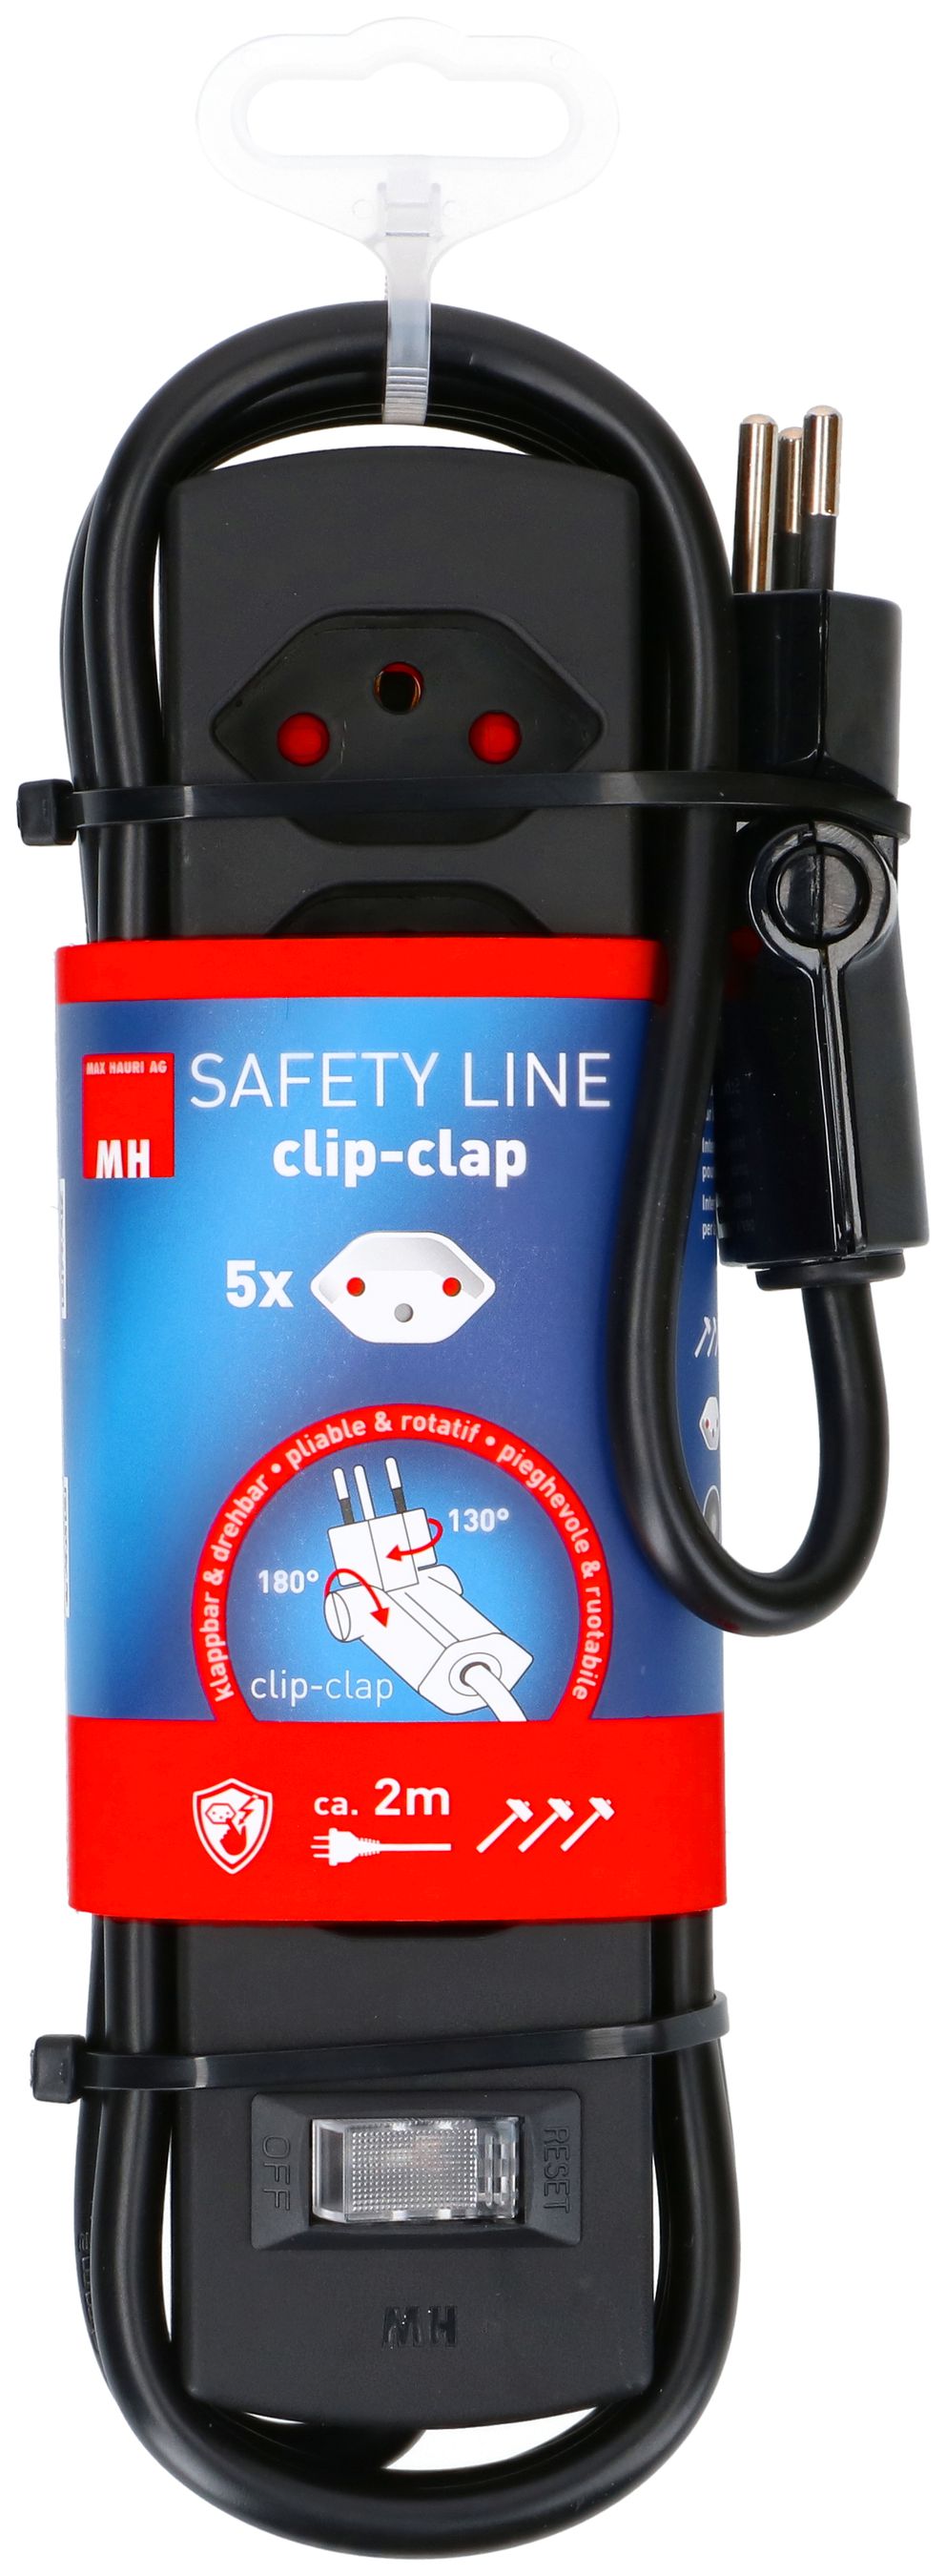 double pack multiprise Safety Line 5x type 13 nr/bc inte. 2m cli